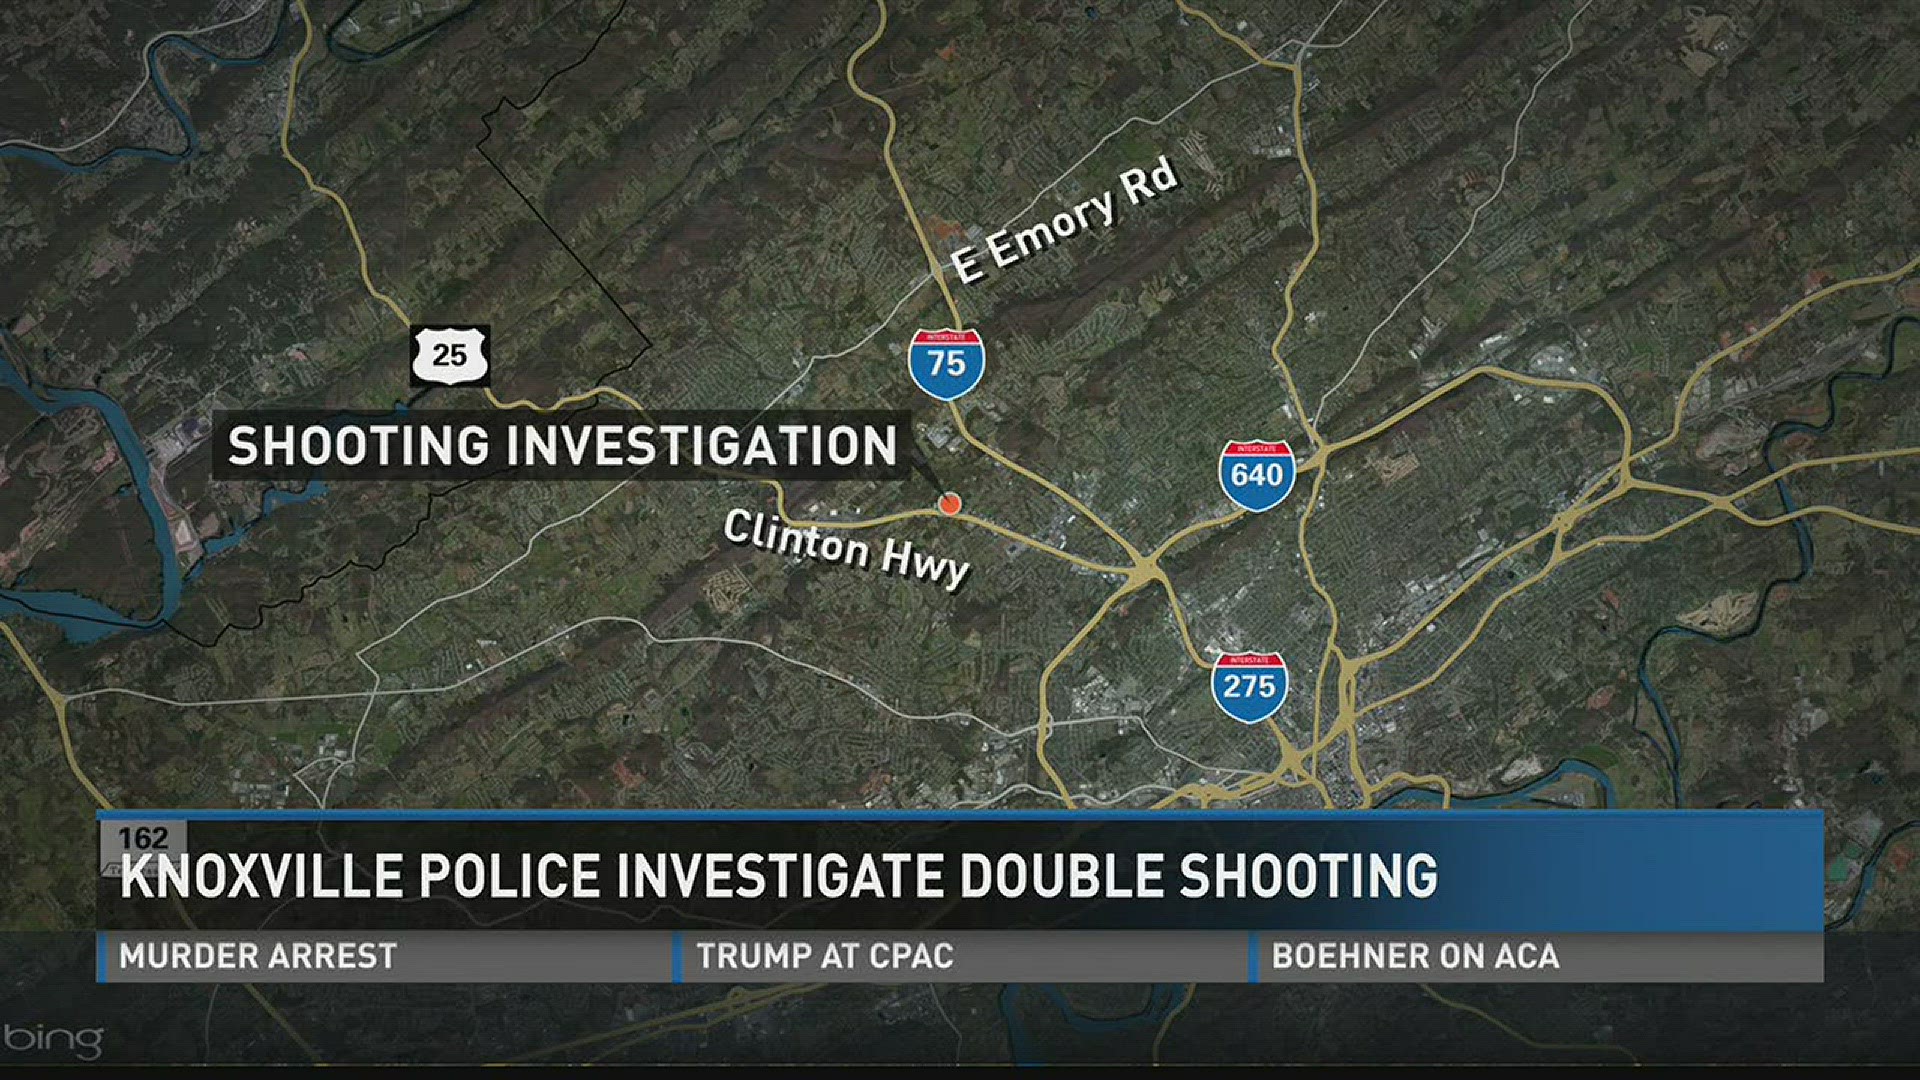 The Knoxville Police Department began to investigate a double shooting on Thursday night.